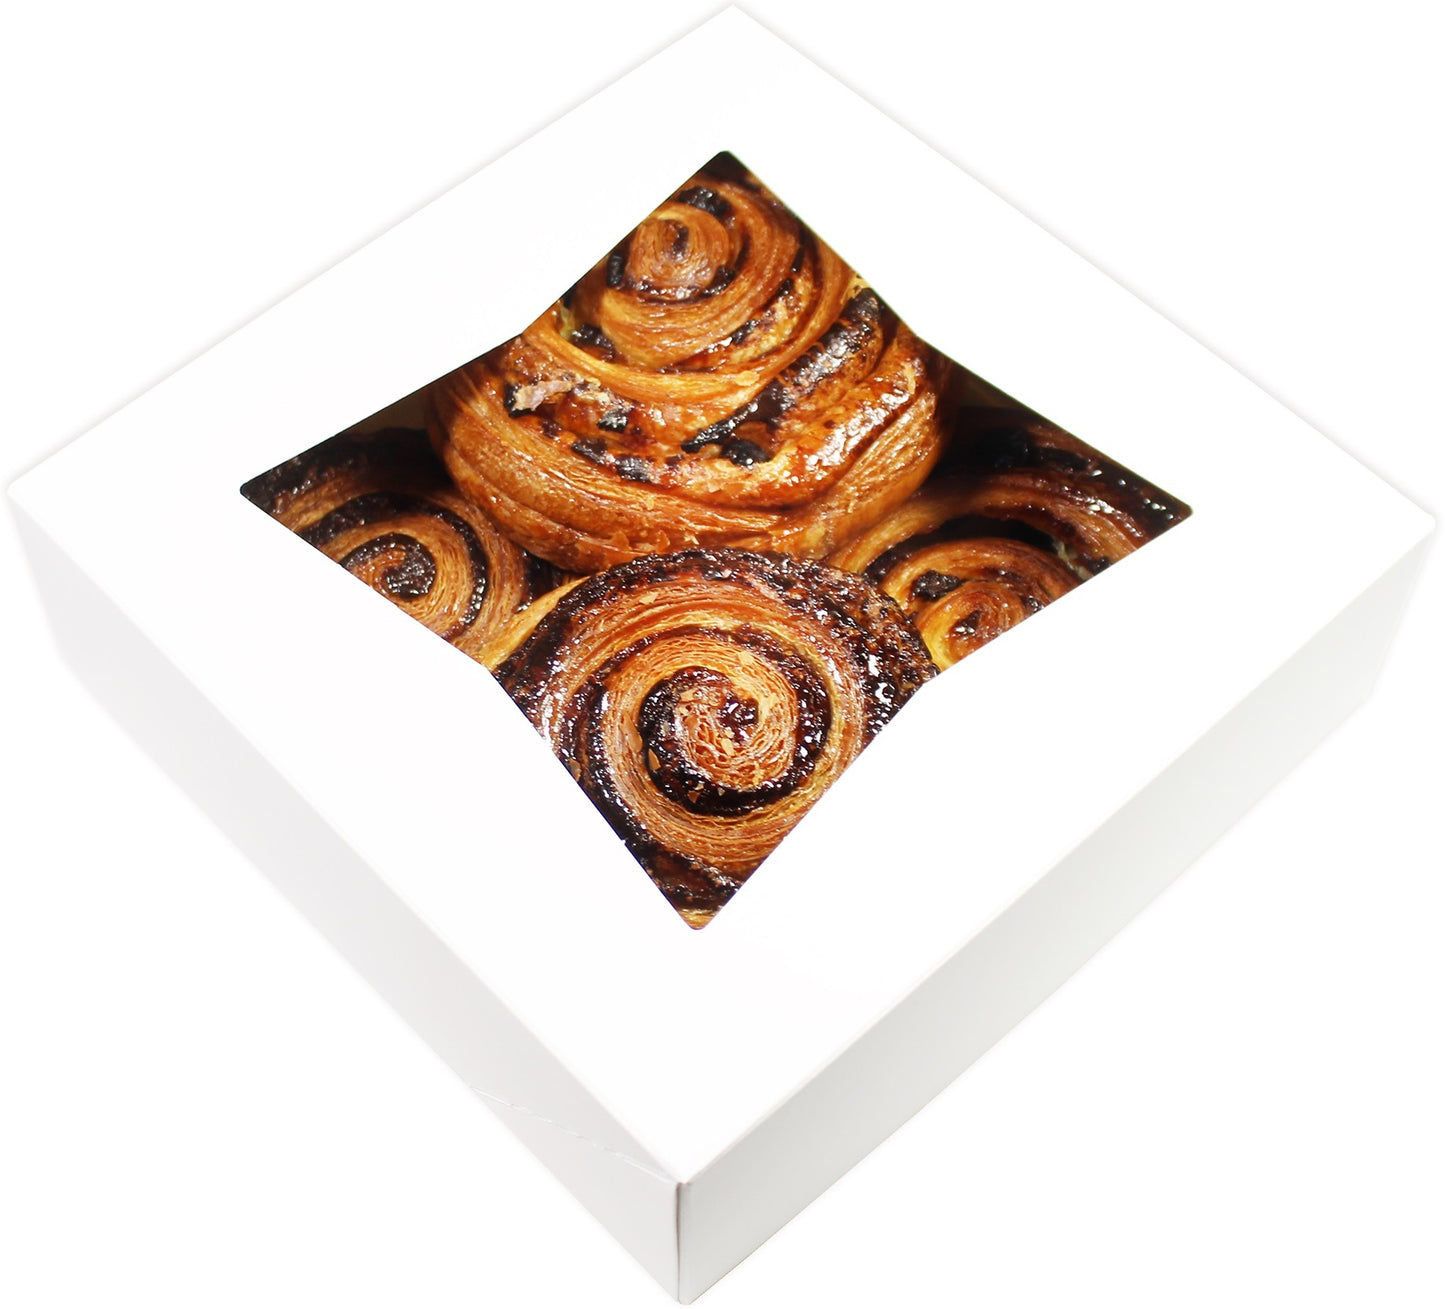 BAKELUV 8X8X2.5” White Pastry Boxes with Window